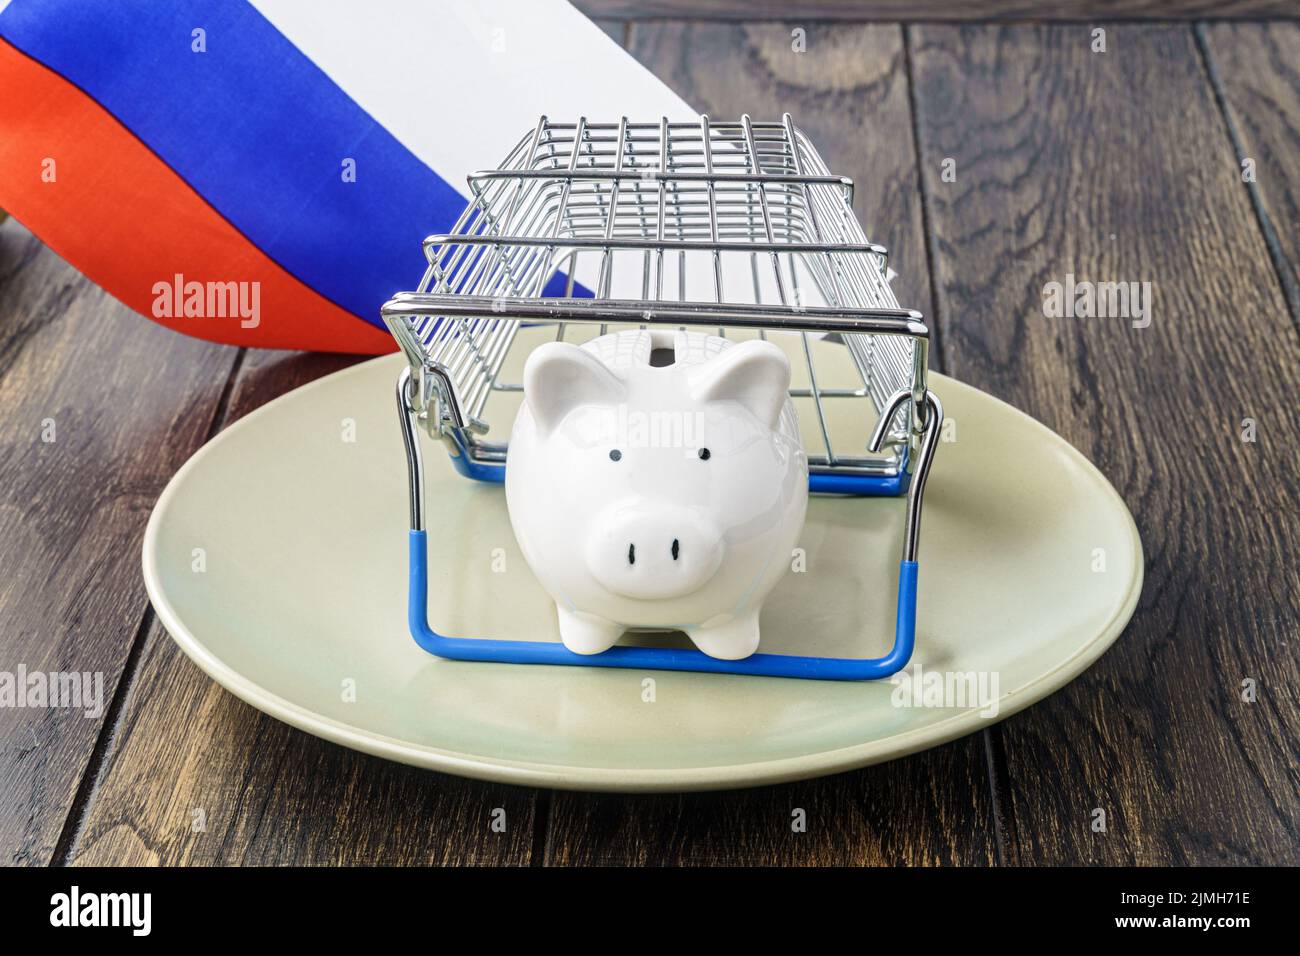 Piggy bank on plate under shop basket and Russian flag. Trade inflation concept Stock Photo